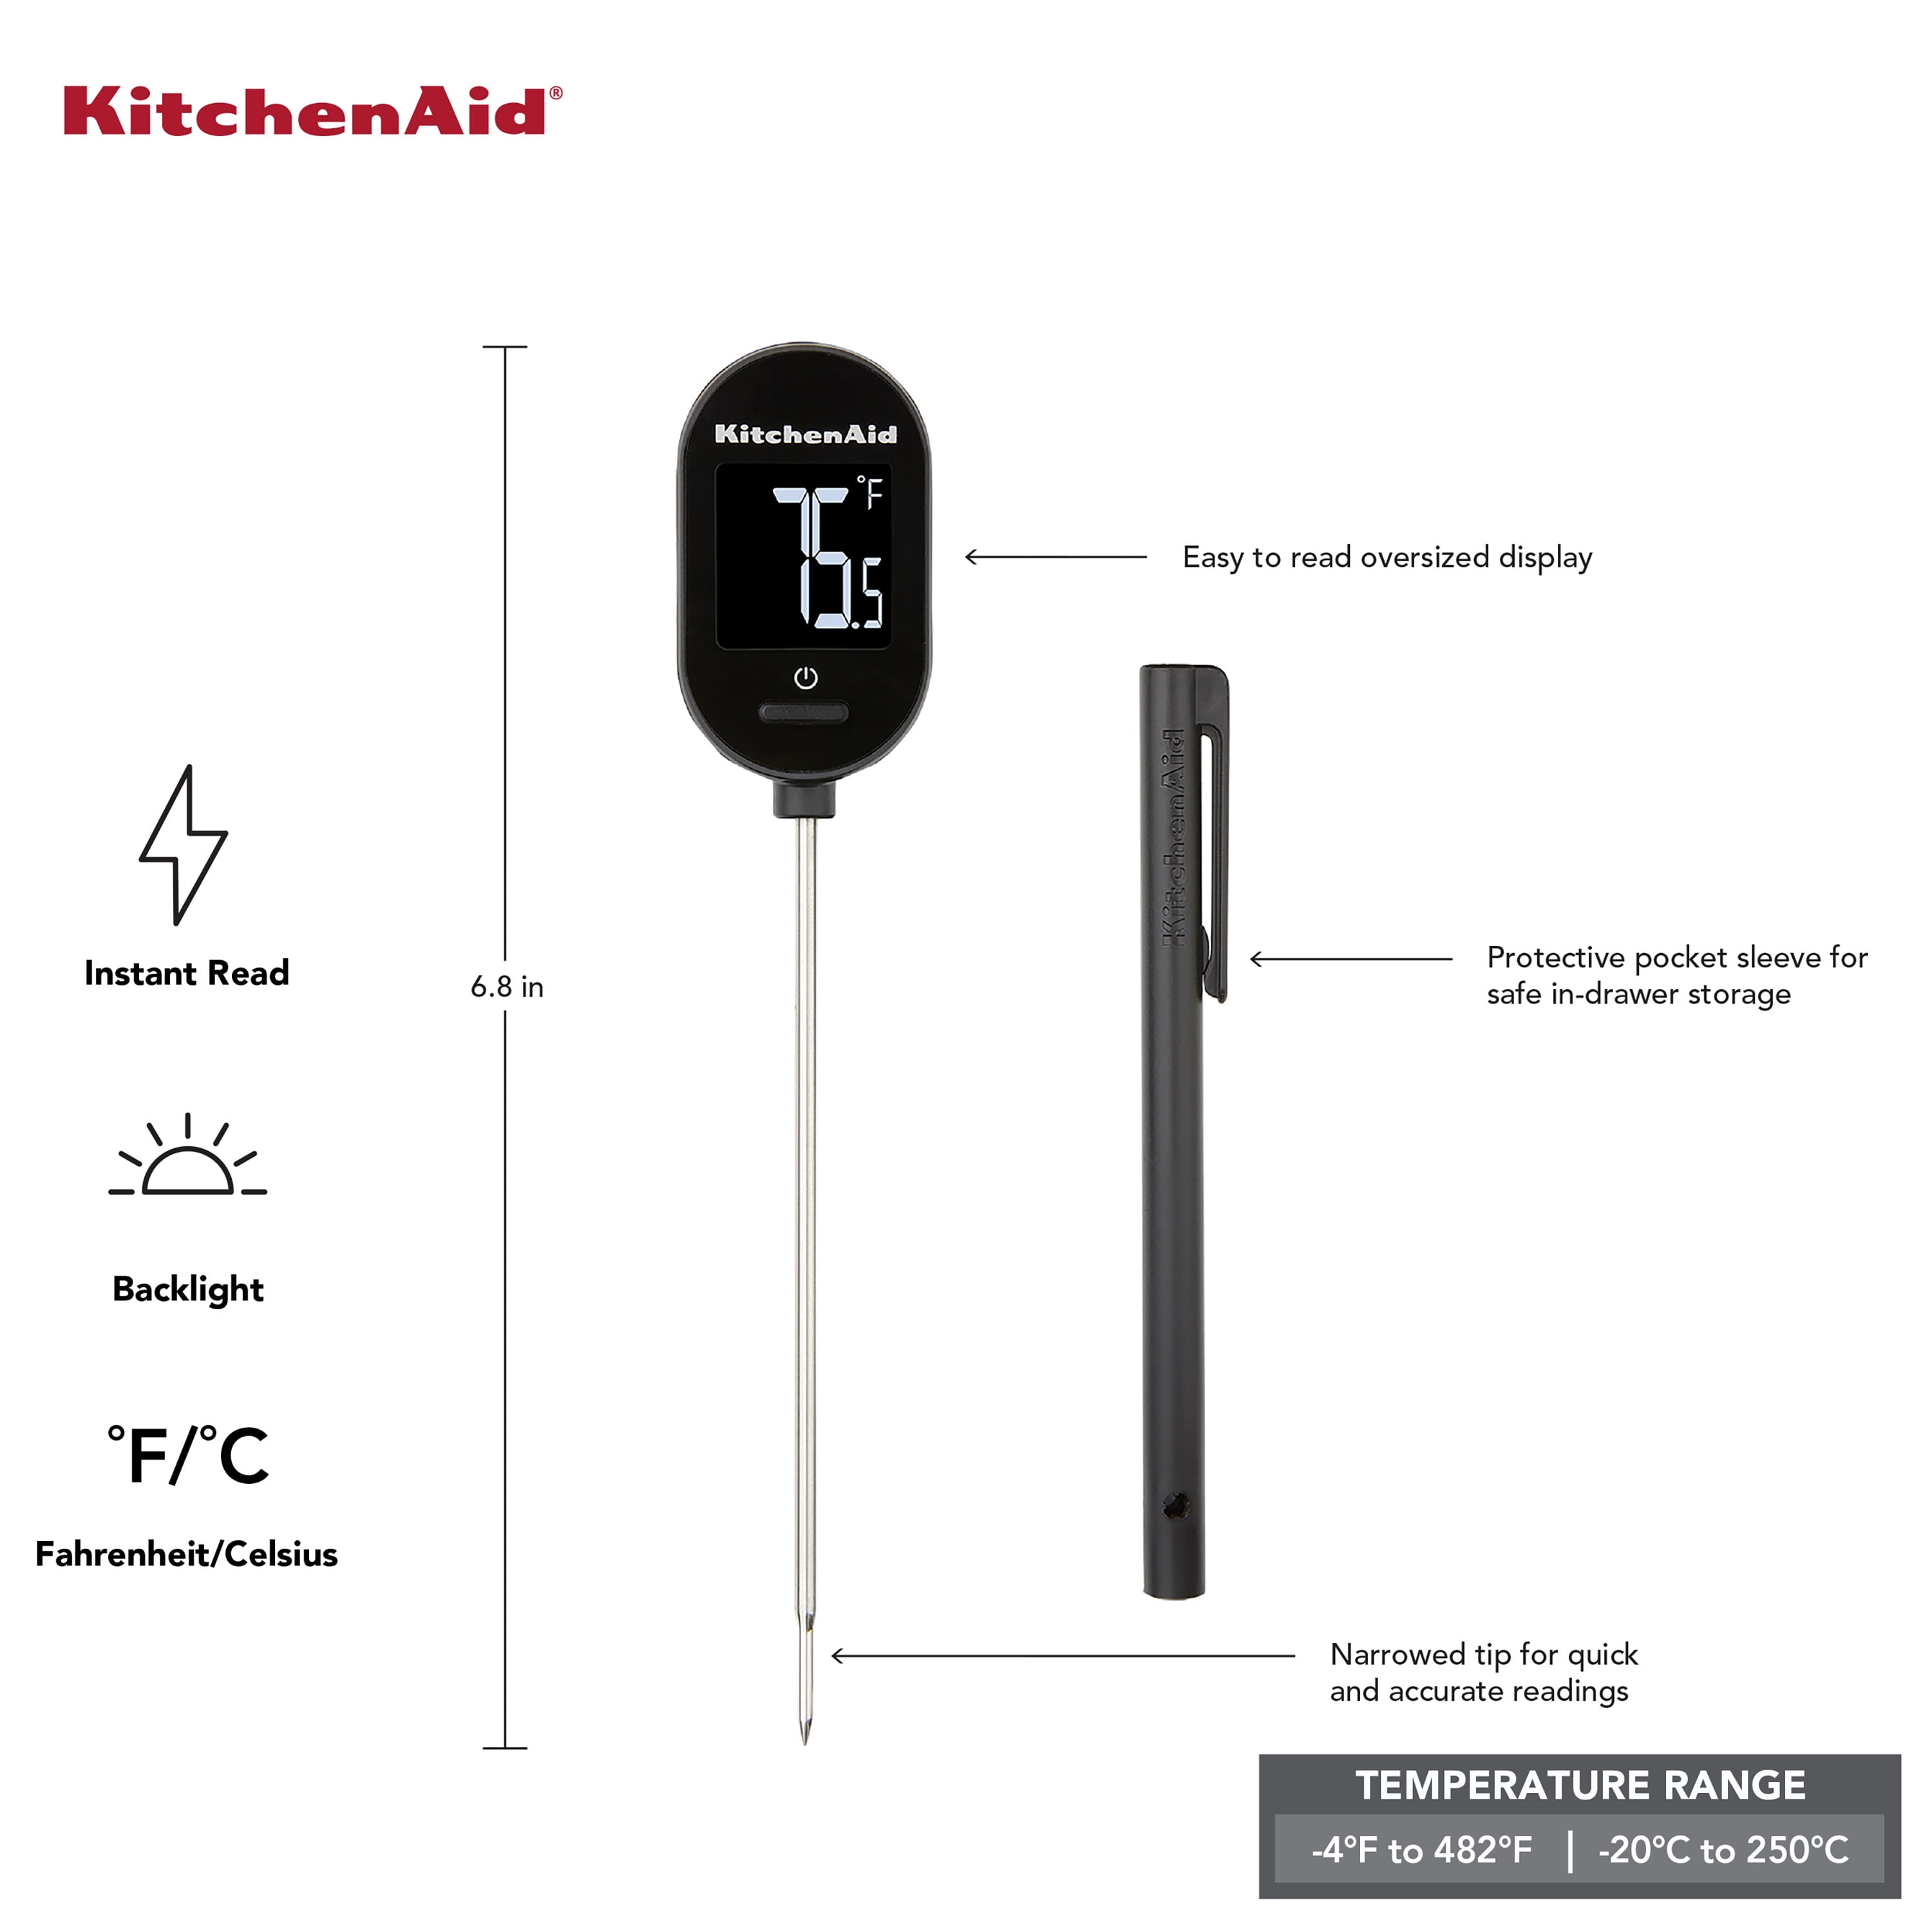  KitchenAid KQ902 Leave-in, Oven/Grill safe Meat Thermometer,  TEMPERATURE RANGE: 120F to 200F, Stainless Steel, Analog: Home & Kitchen